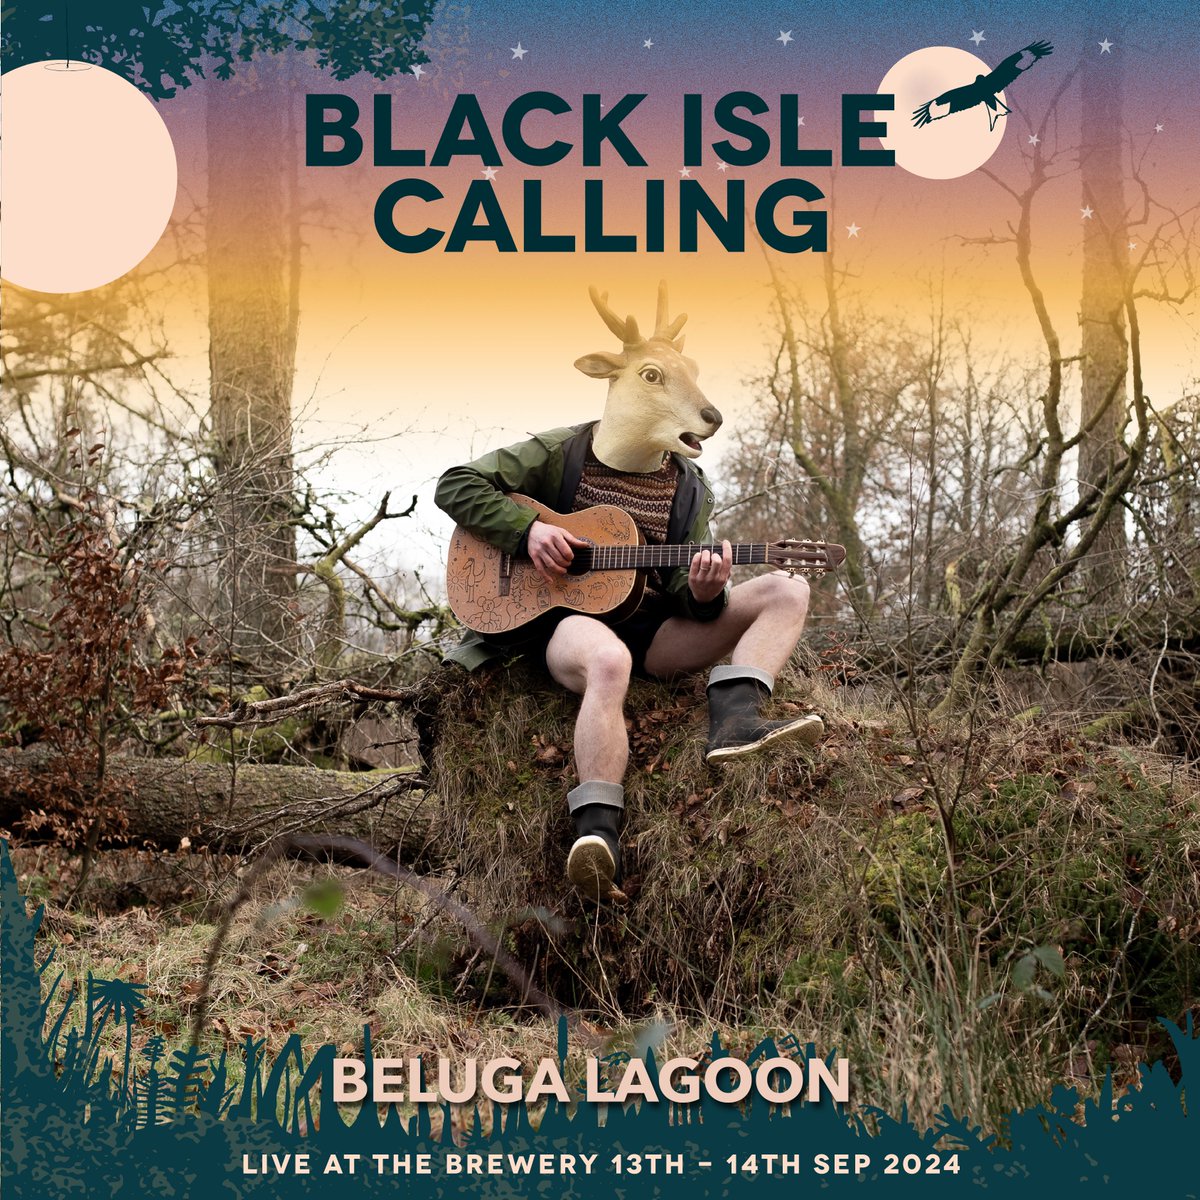 We are delighted to be performing at the very first Black Isle Calling Festival this September. Get your tickets now from linktr.ee/blackislecalli…'